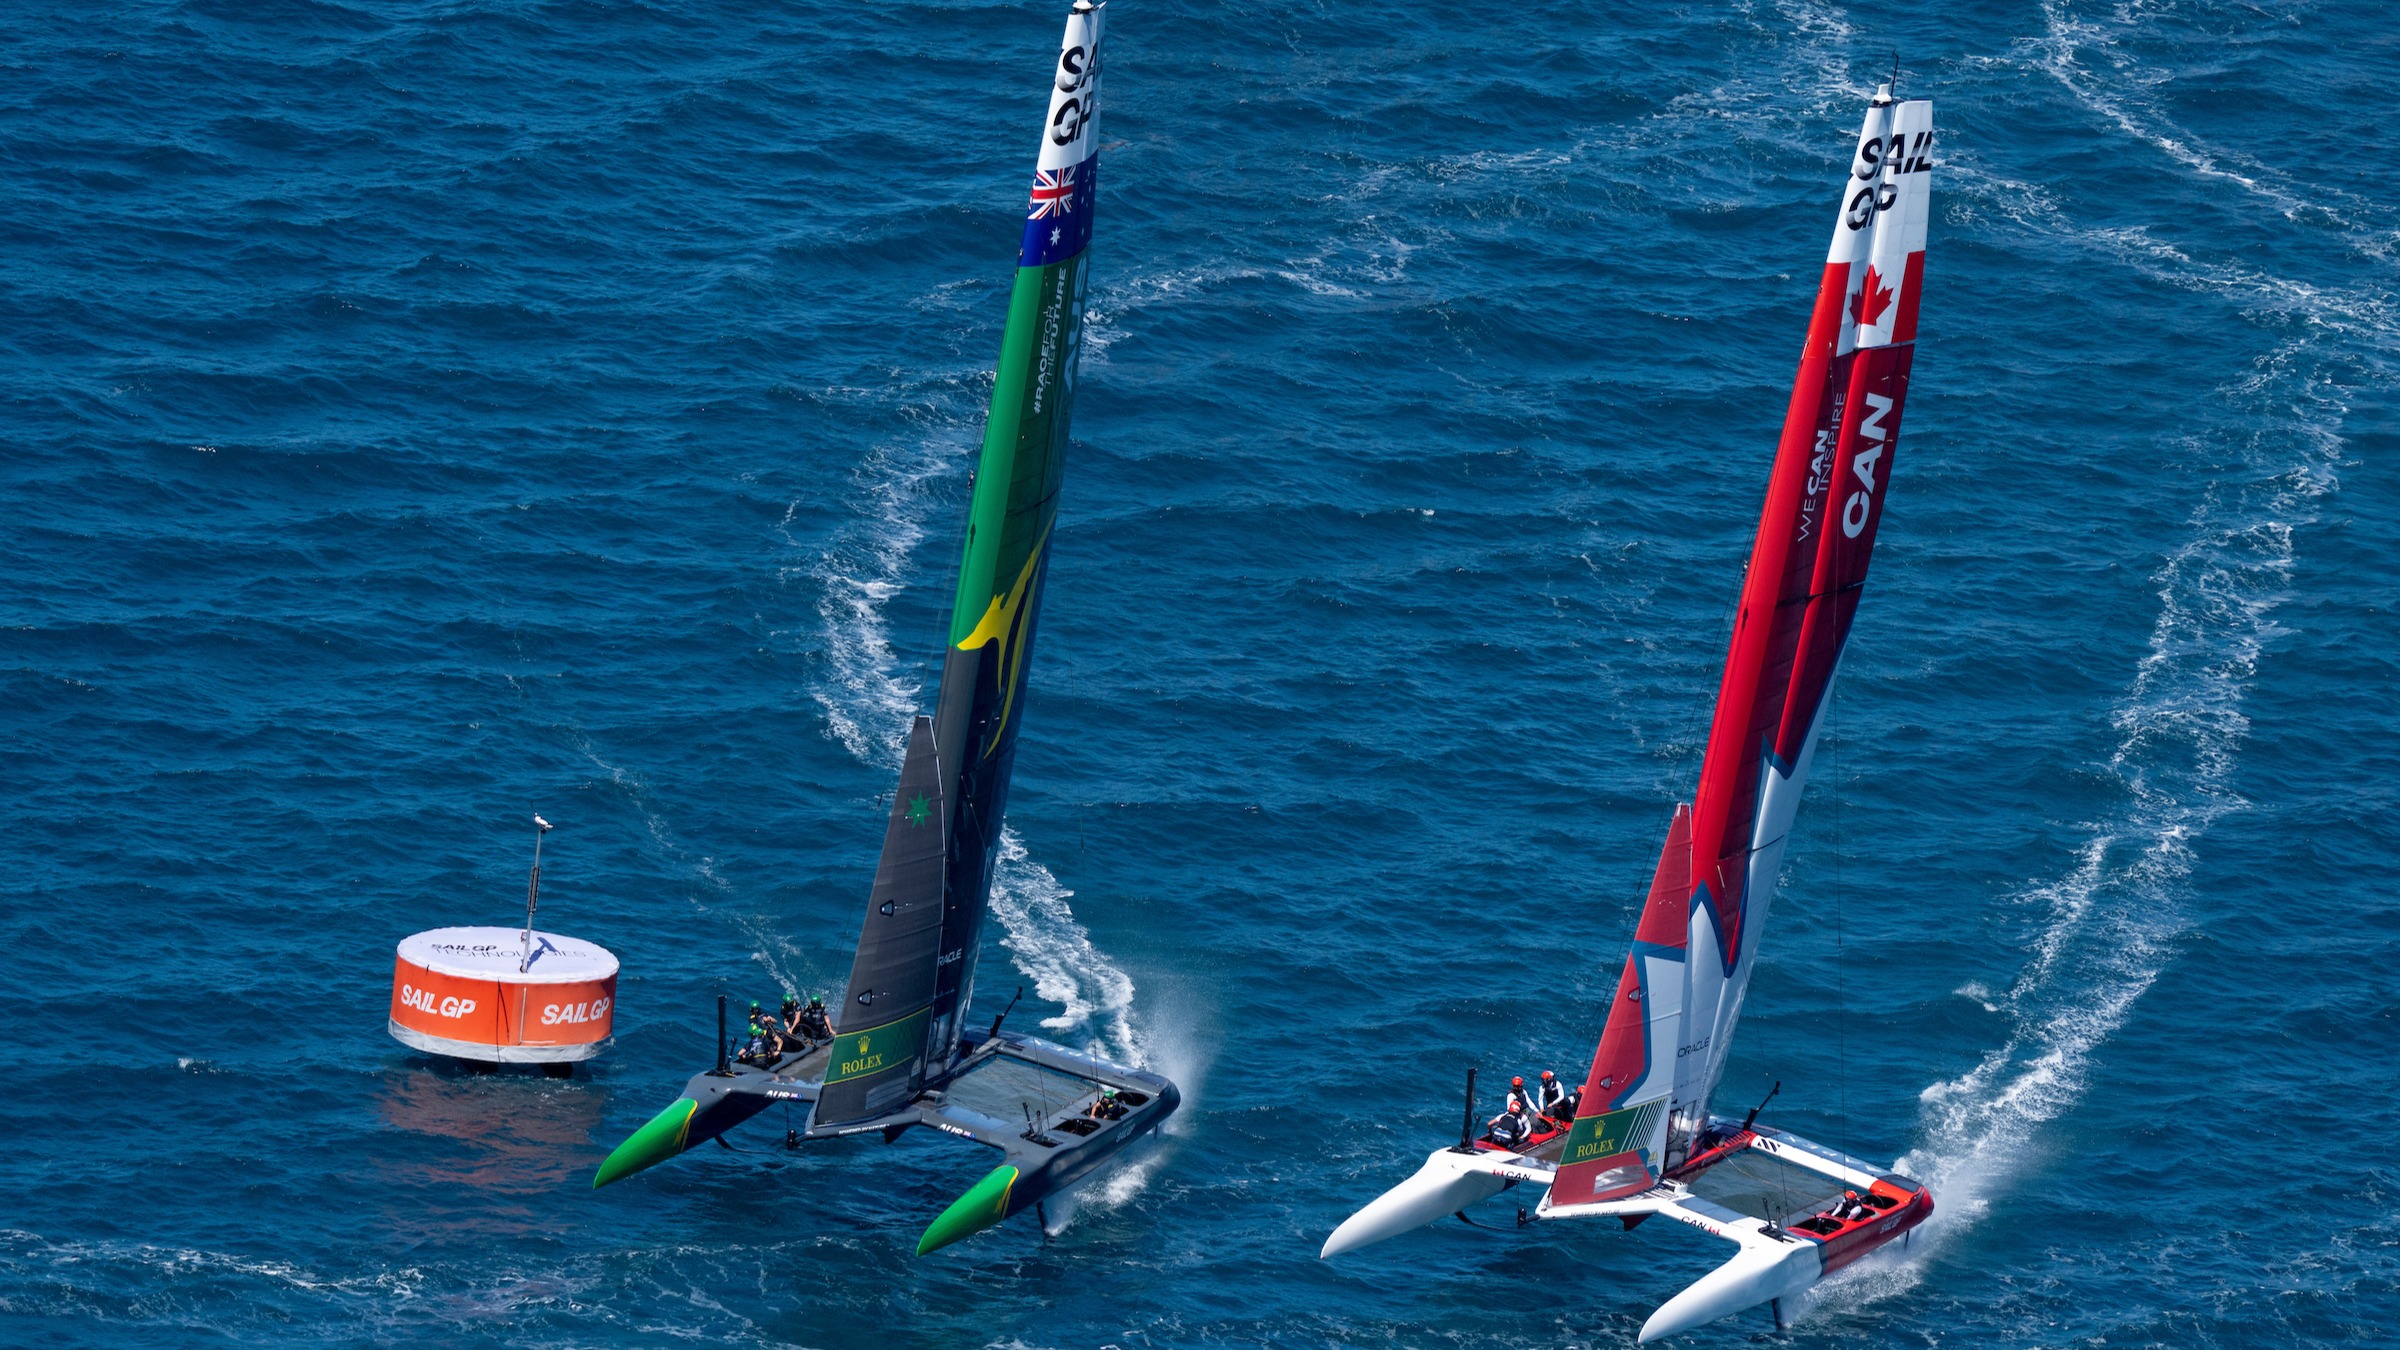 Season 4 // Australia and Canada go head to head on first day of racing in Bermuda